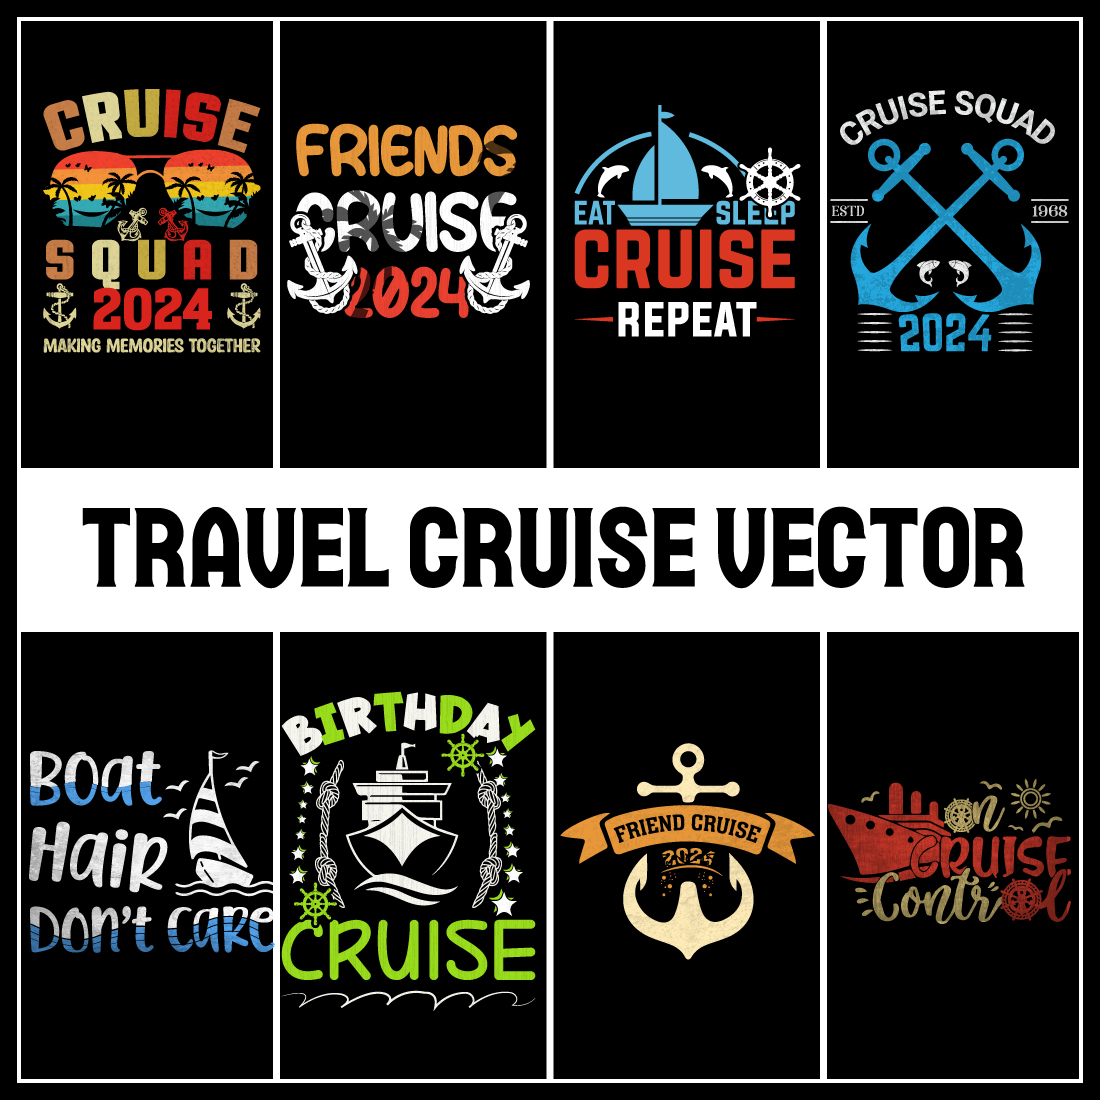 Cruise T-Shirt Design Bundle- Cruise T-shirt Design- Travel cruise vector, illustration, silhouette, or graphics cover image.